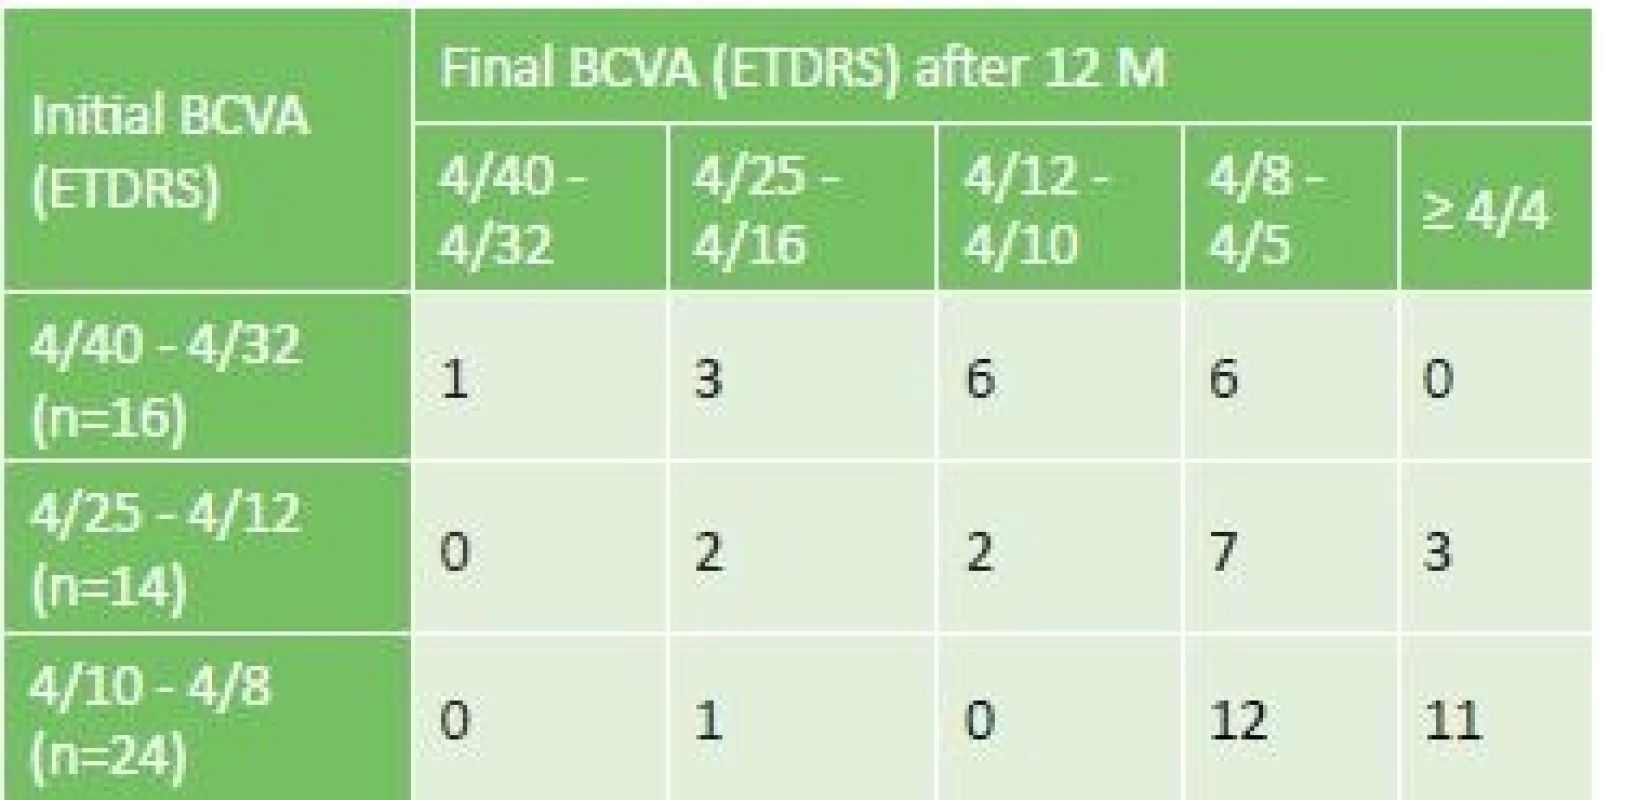 Resulting BCVA after 12 months of treatment in 3 groups
with different initial BCVA